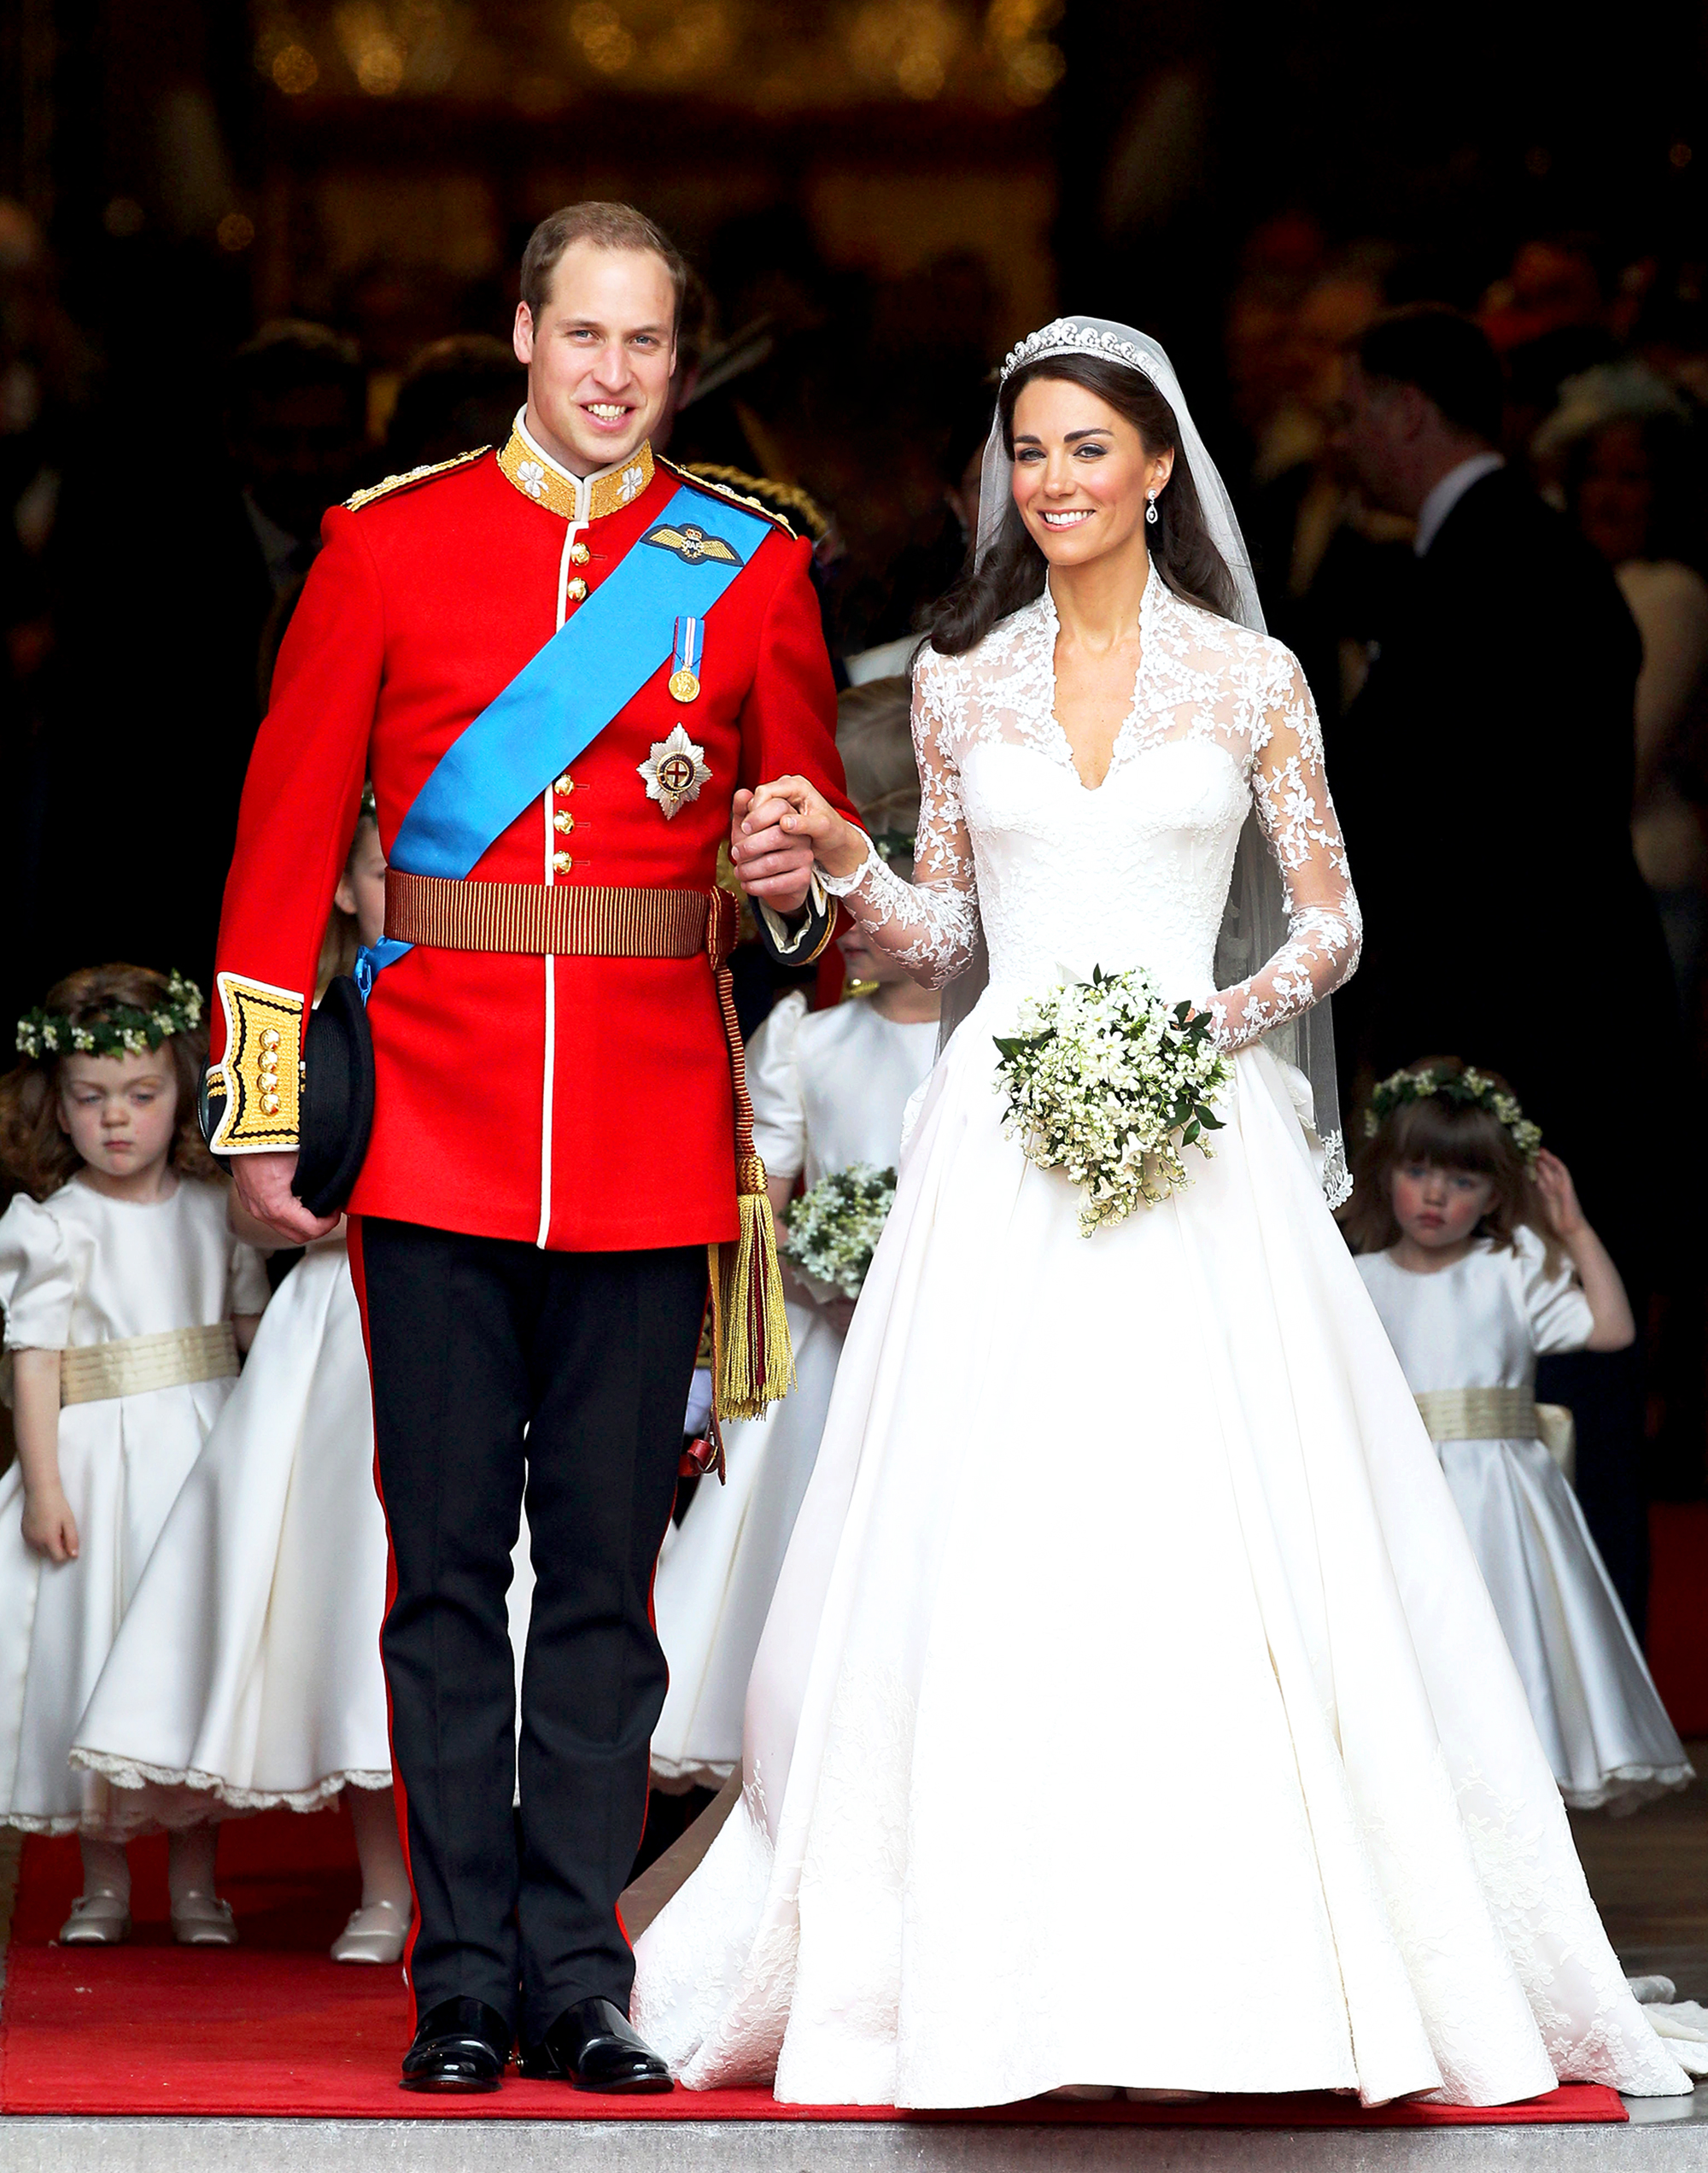 Relive Prince William and Duchess Kate's 2011 Wedding: Listen!